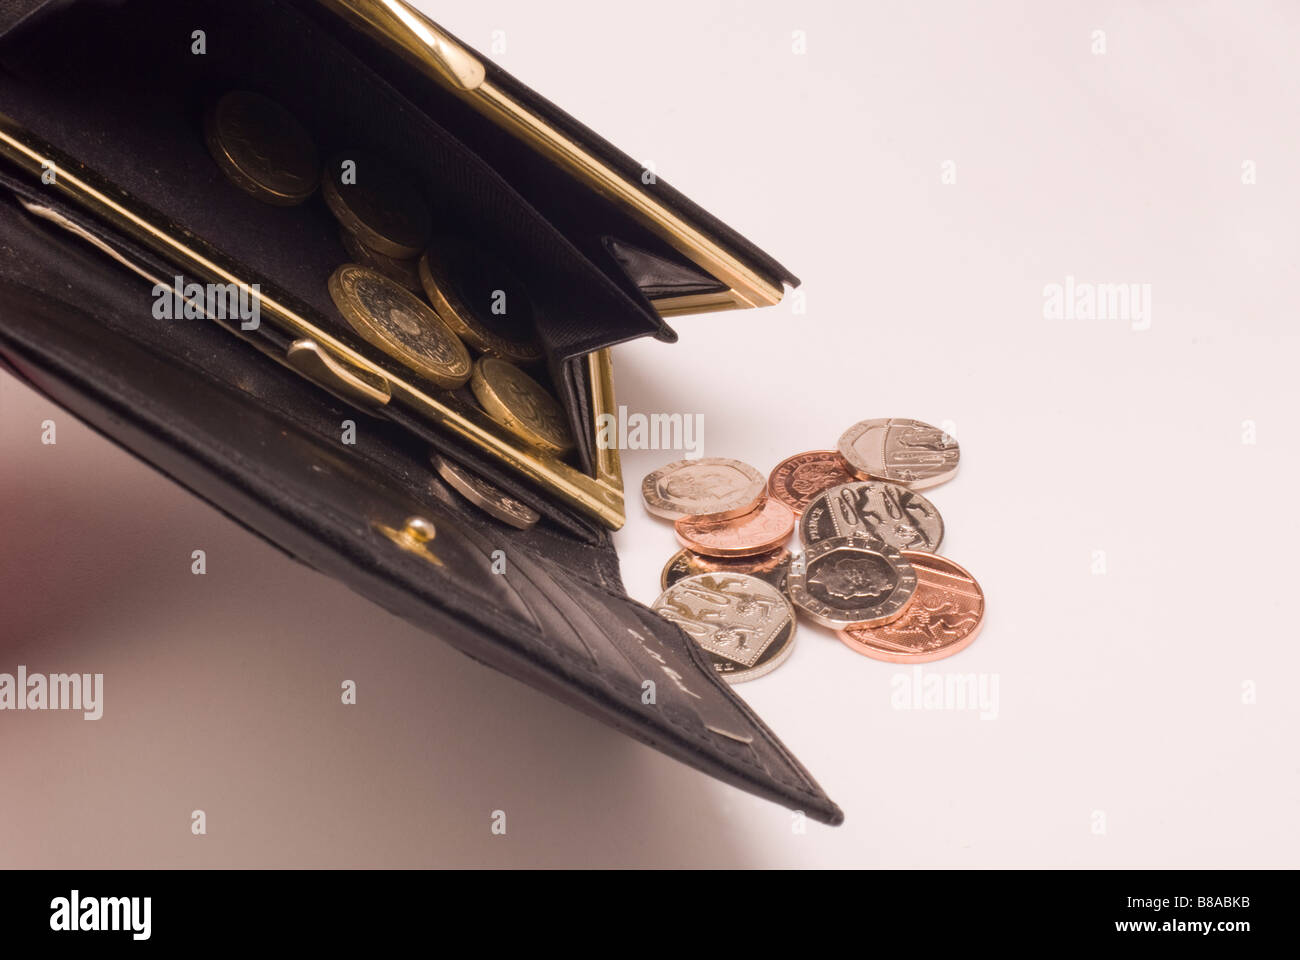 money falling from a purse Stock Photo